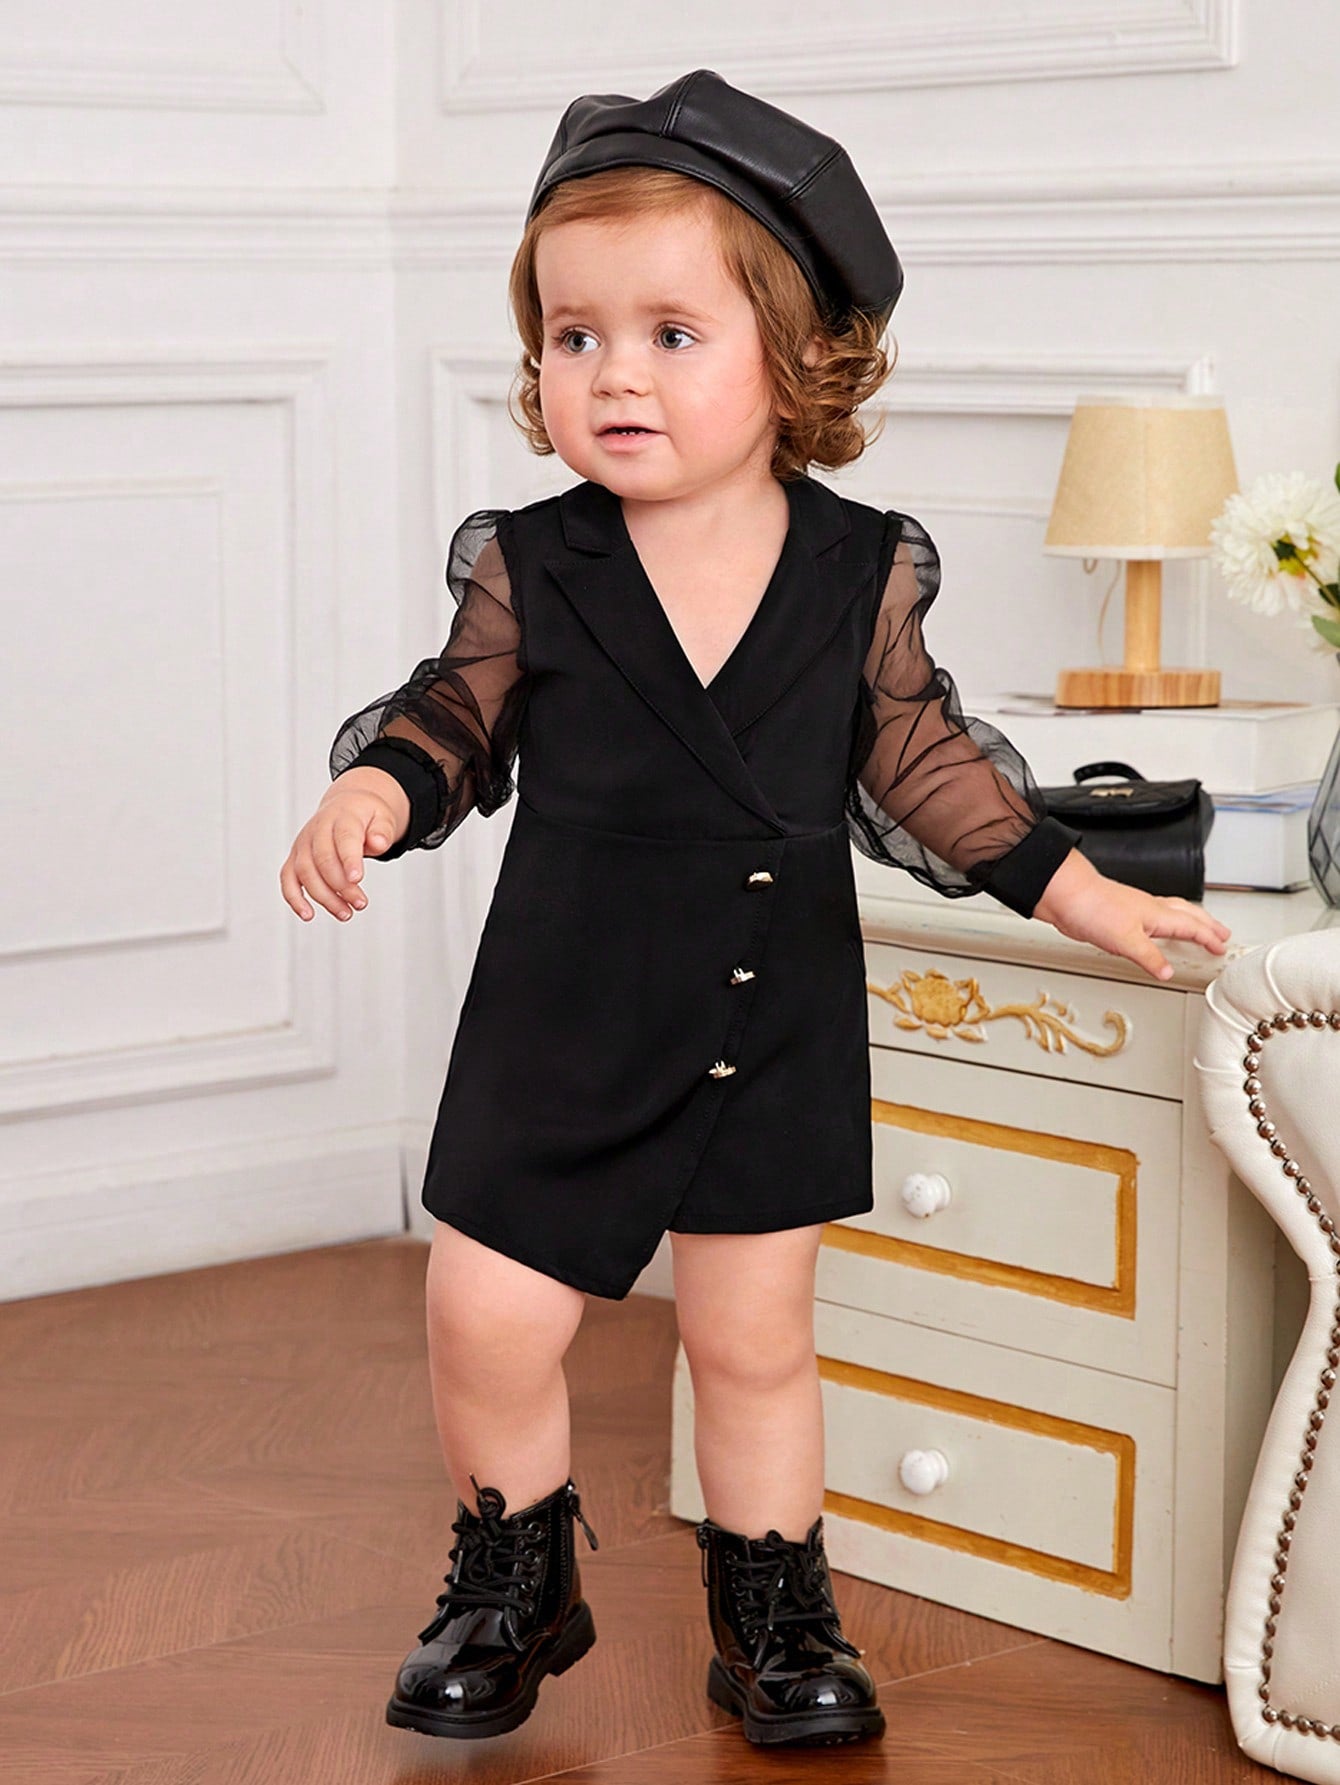 Infant Girls' Lovely Style Solid Color Spliced Mesh & Asymmetrical Hem Romper With Buttons Detail